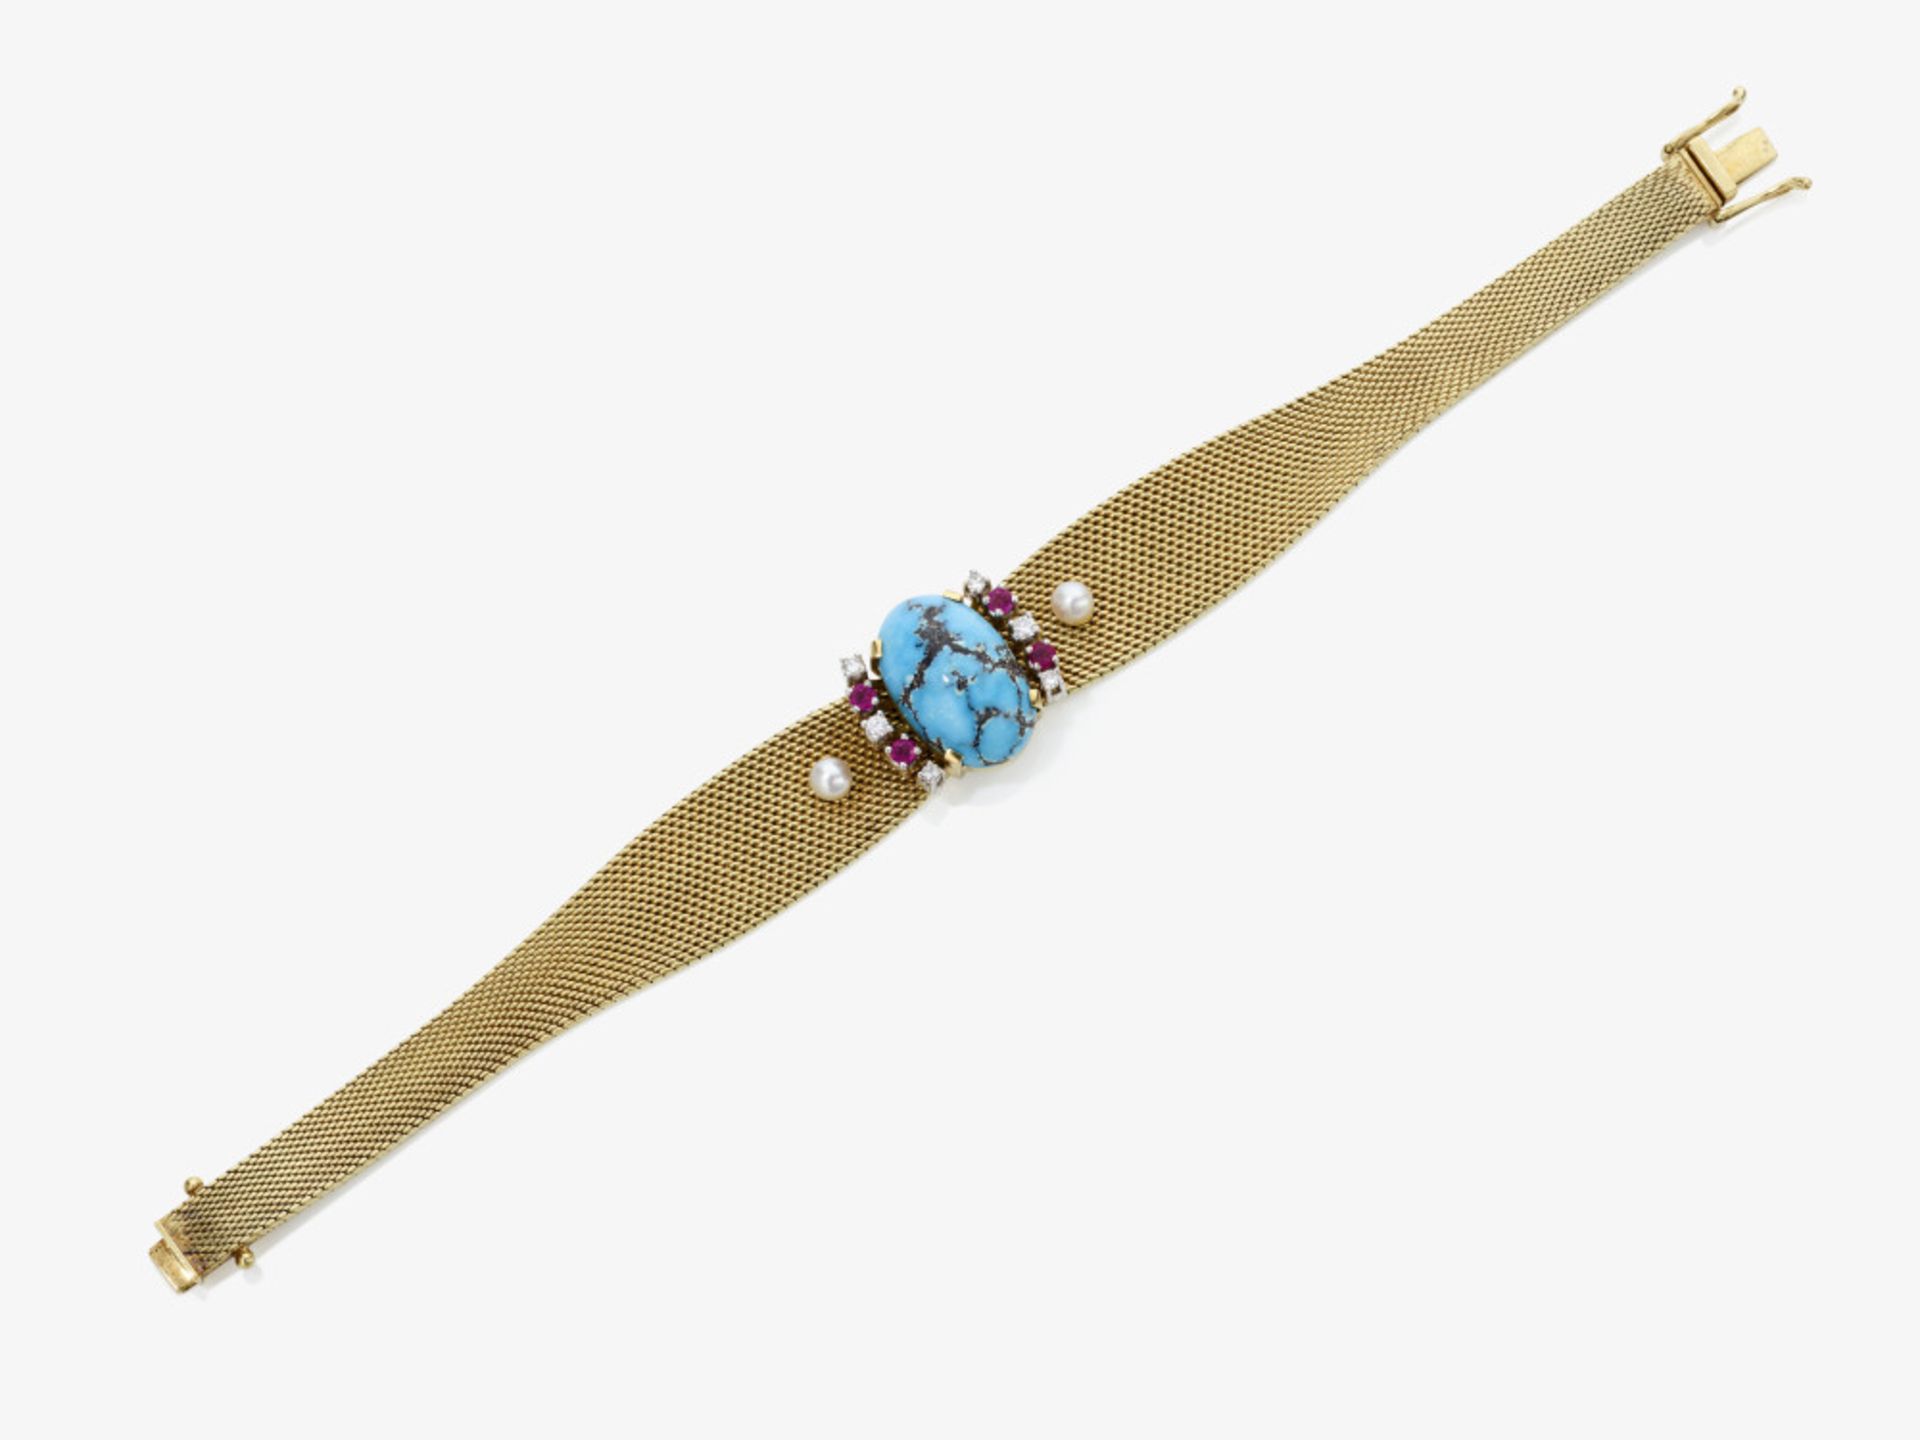 A bracelet with turquoise, brilliant-cut diamonds and rubies - Germany, 1960s / 1970s - Image 2 of 2